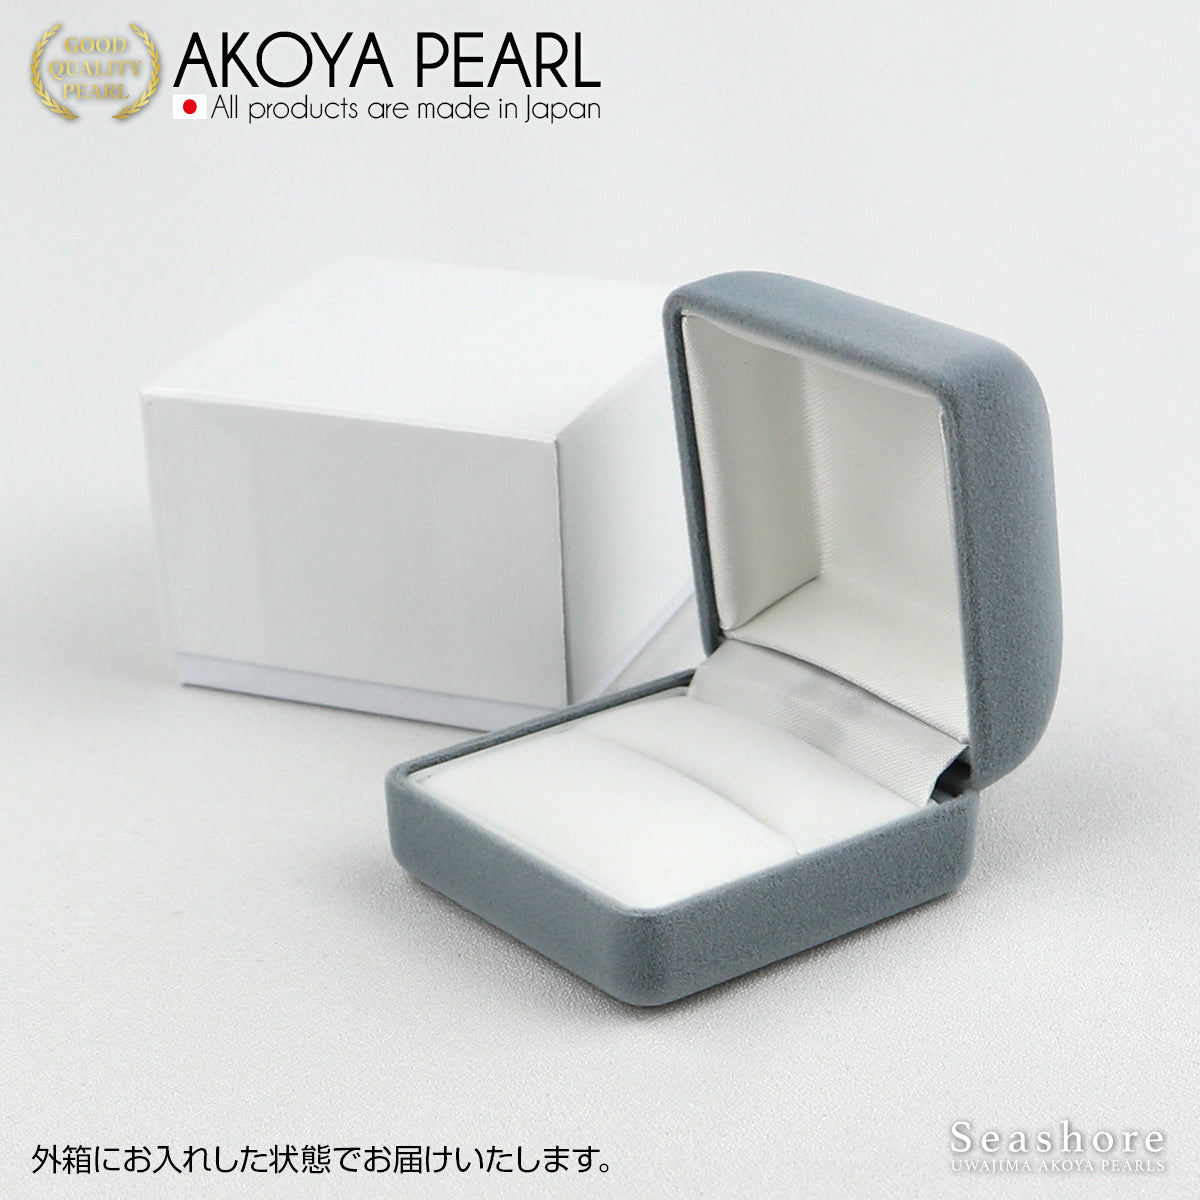 Ring Case Ring Case Compact Velor Fabric Pearl Case Gray (2.0.745.1557)